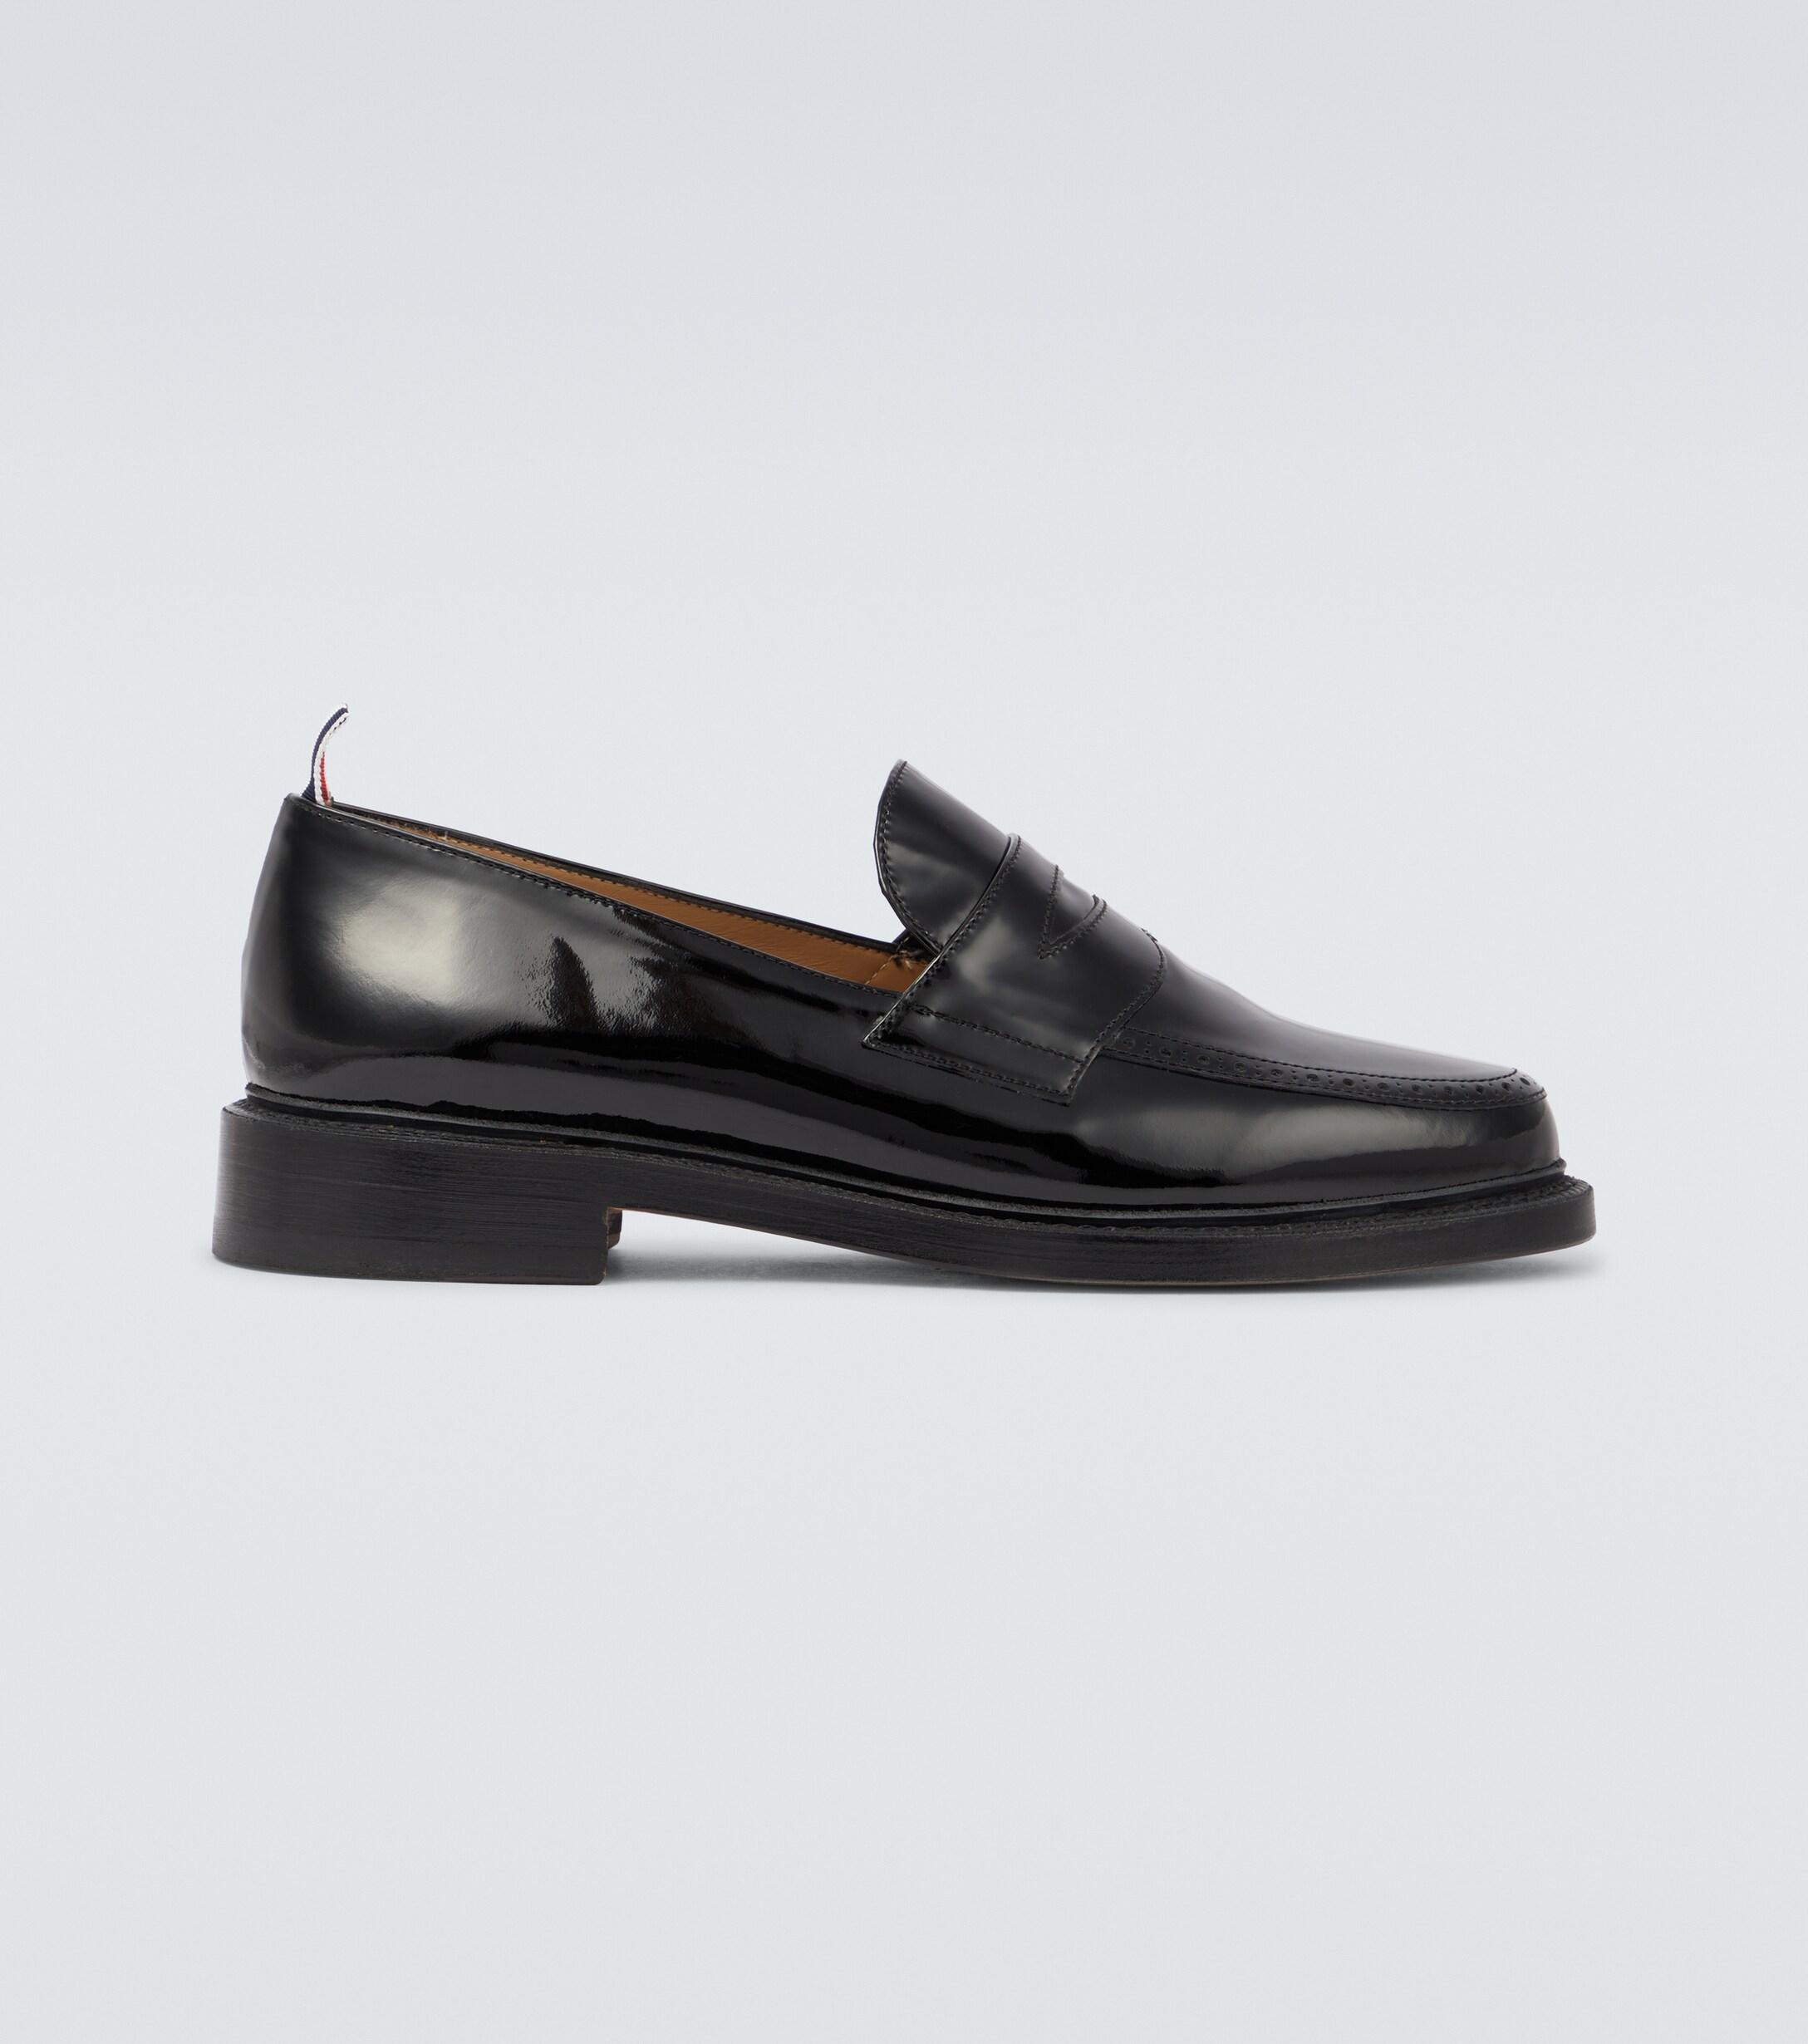 Thom Browne Polished Leather Penny Loafers in Black for Men - Lyst